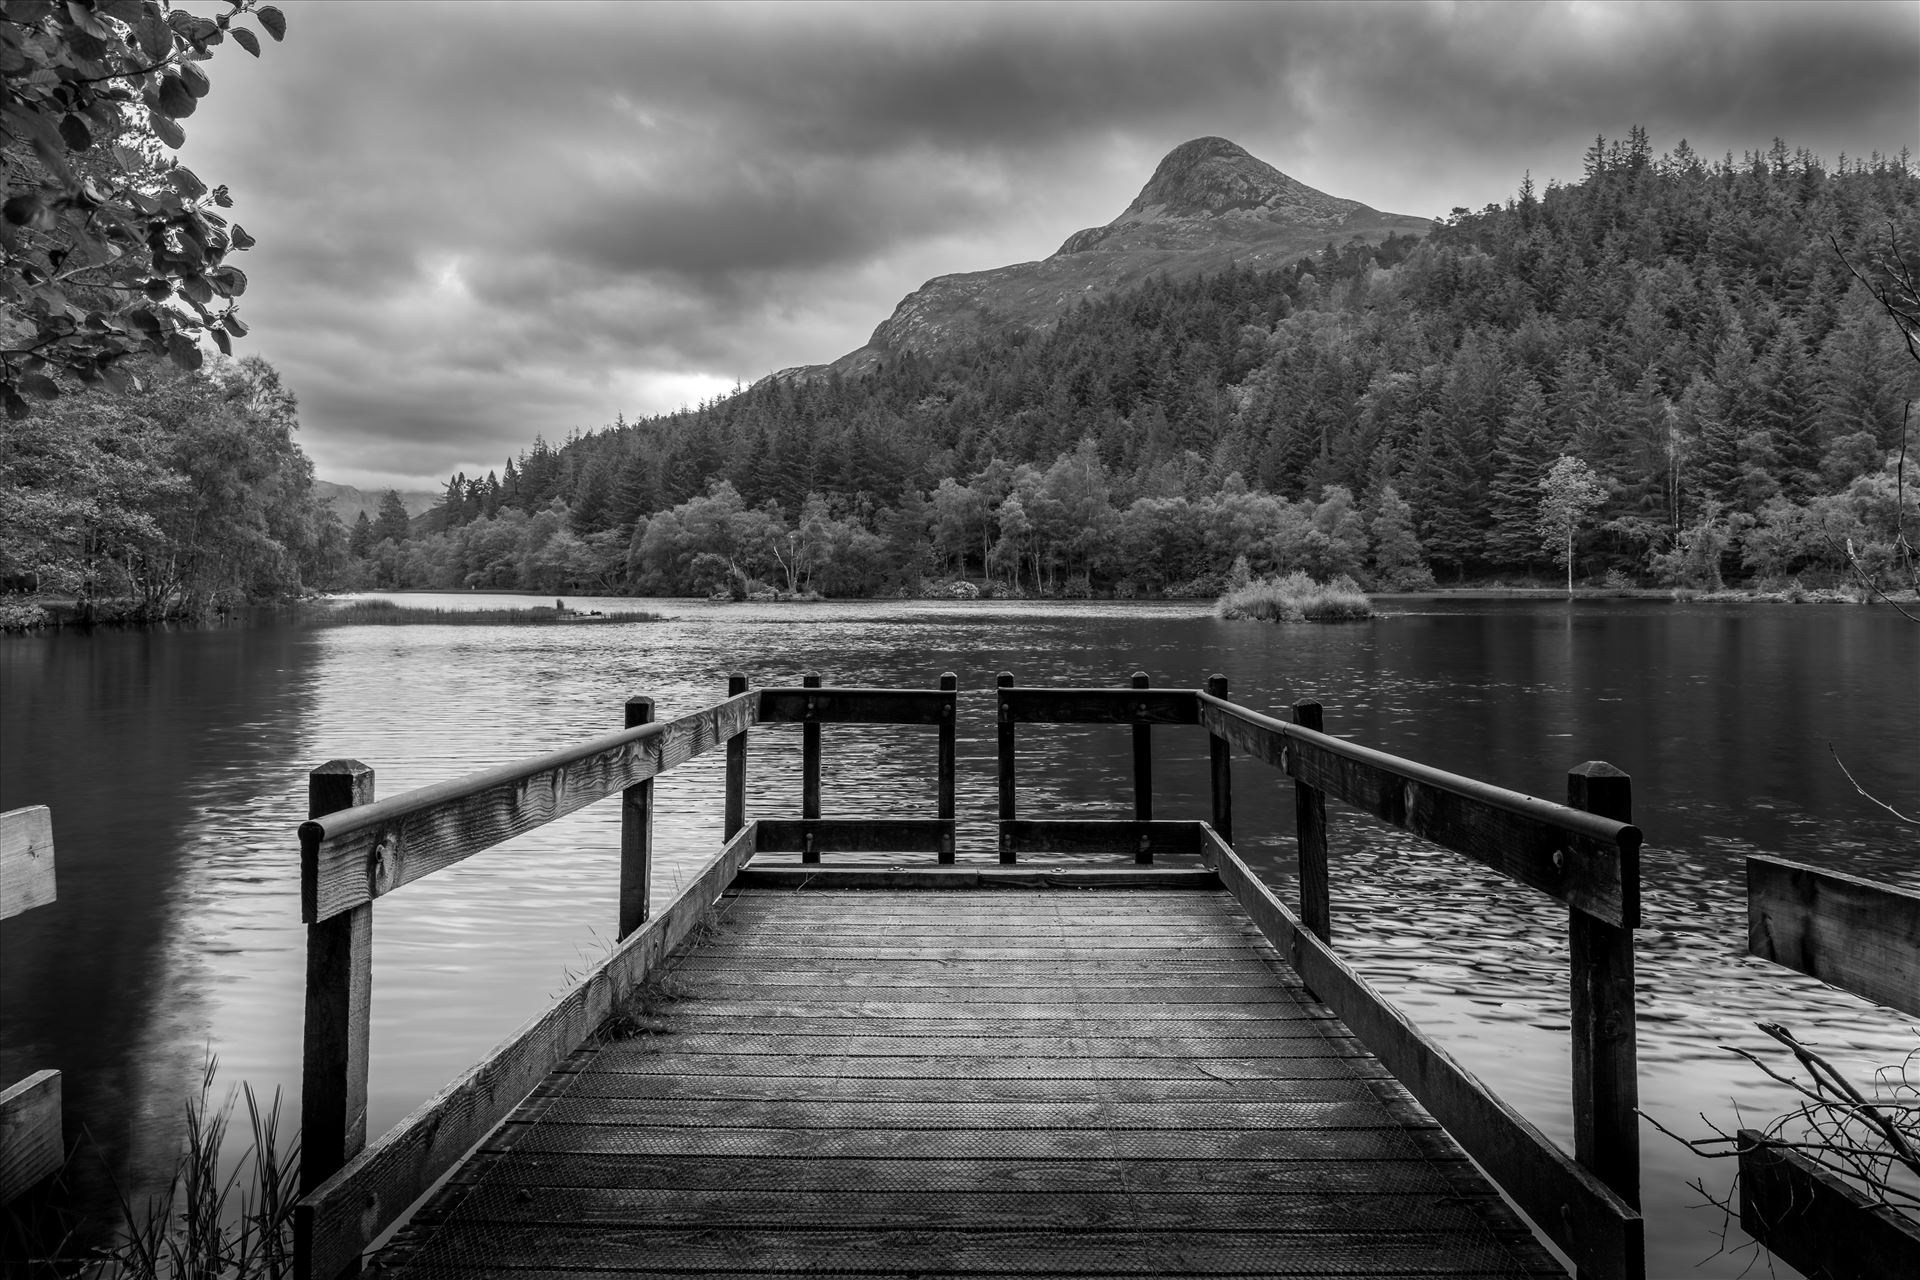 Glencoe Lochan Glencoe Lochan is a tract of forest located just north of Glencoe village in the Scottish Highlands by philreay